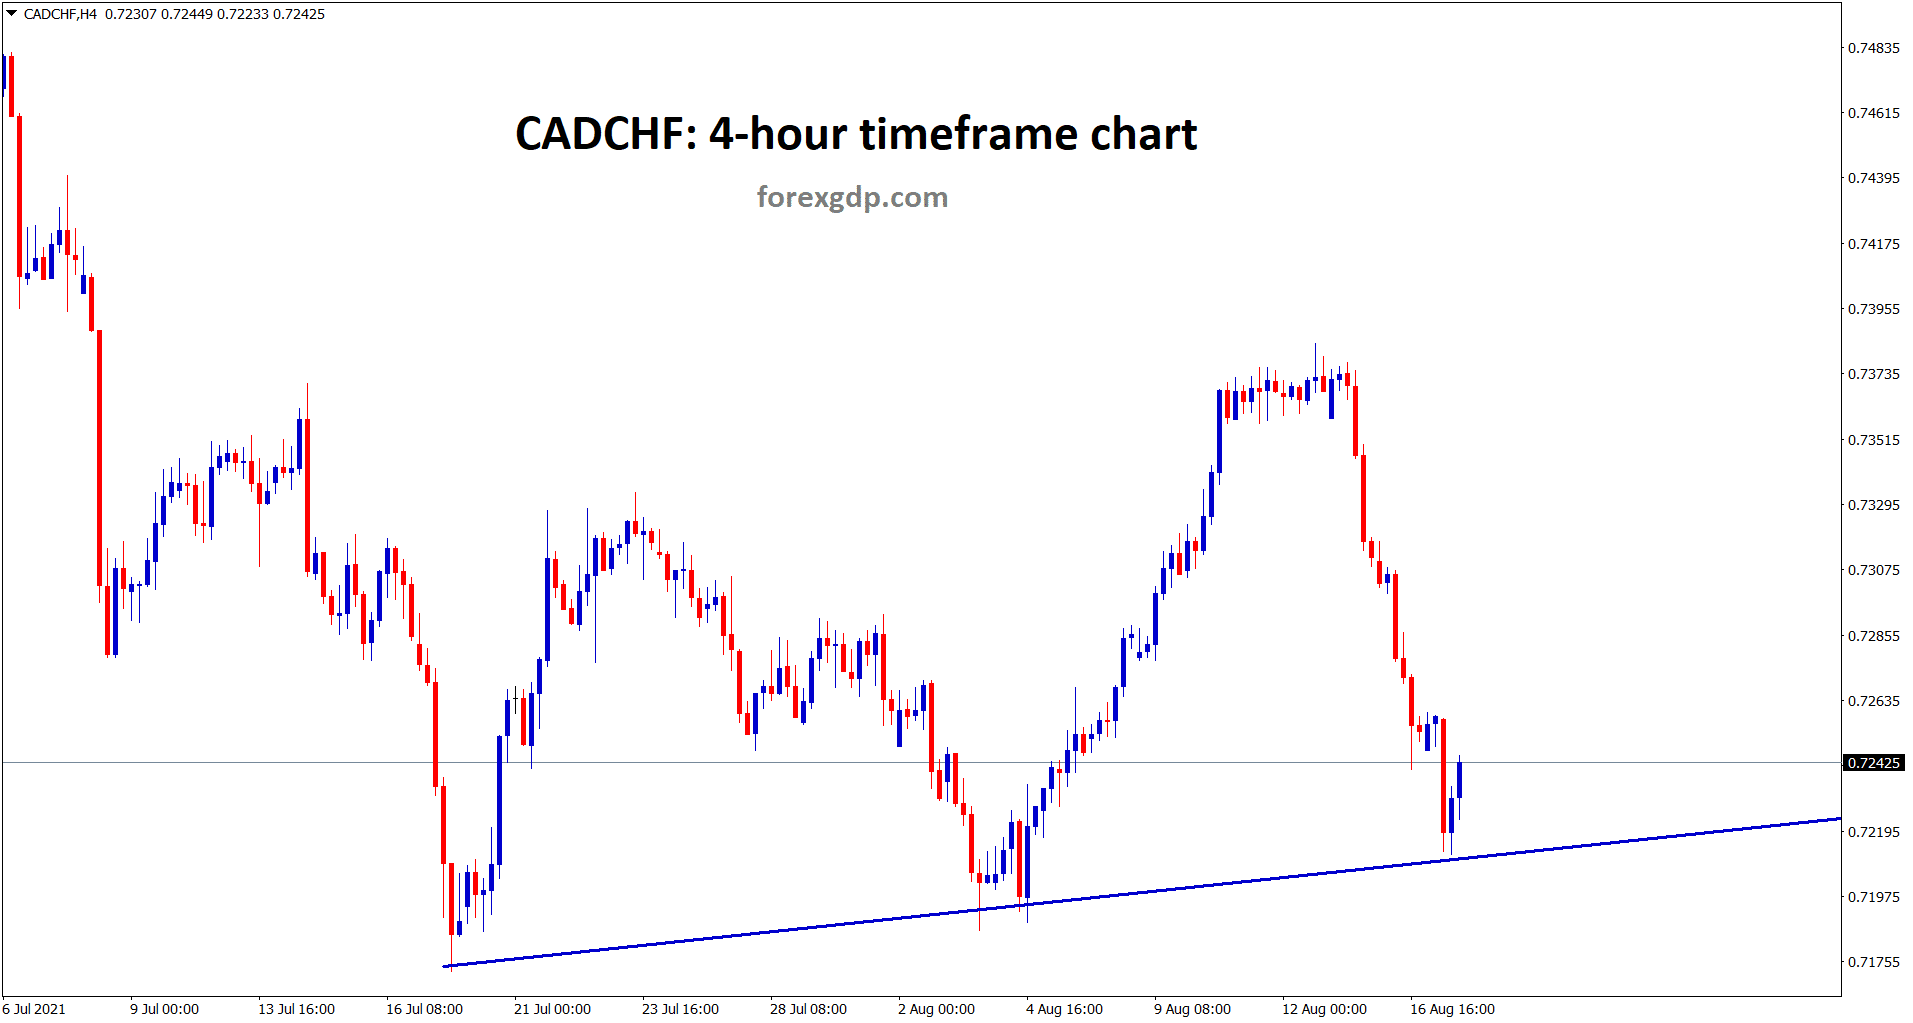 CADCHF is ranging between the resistance and support areas